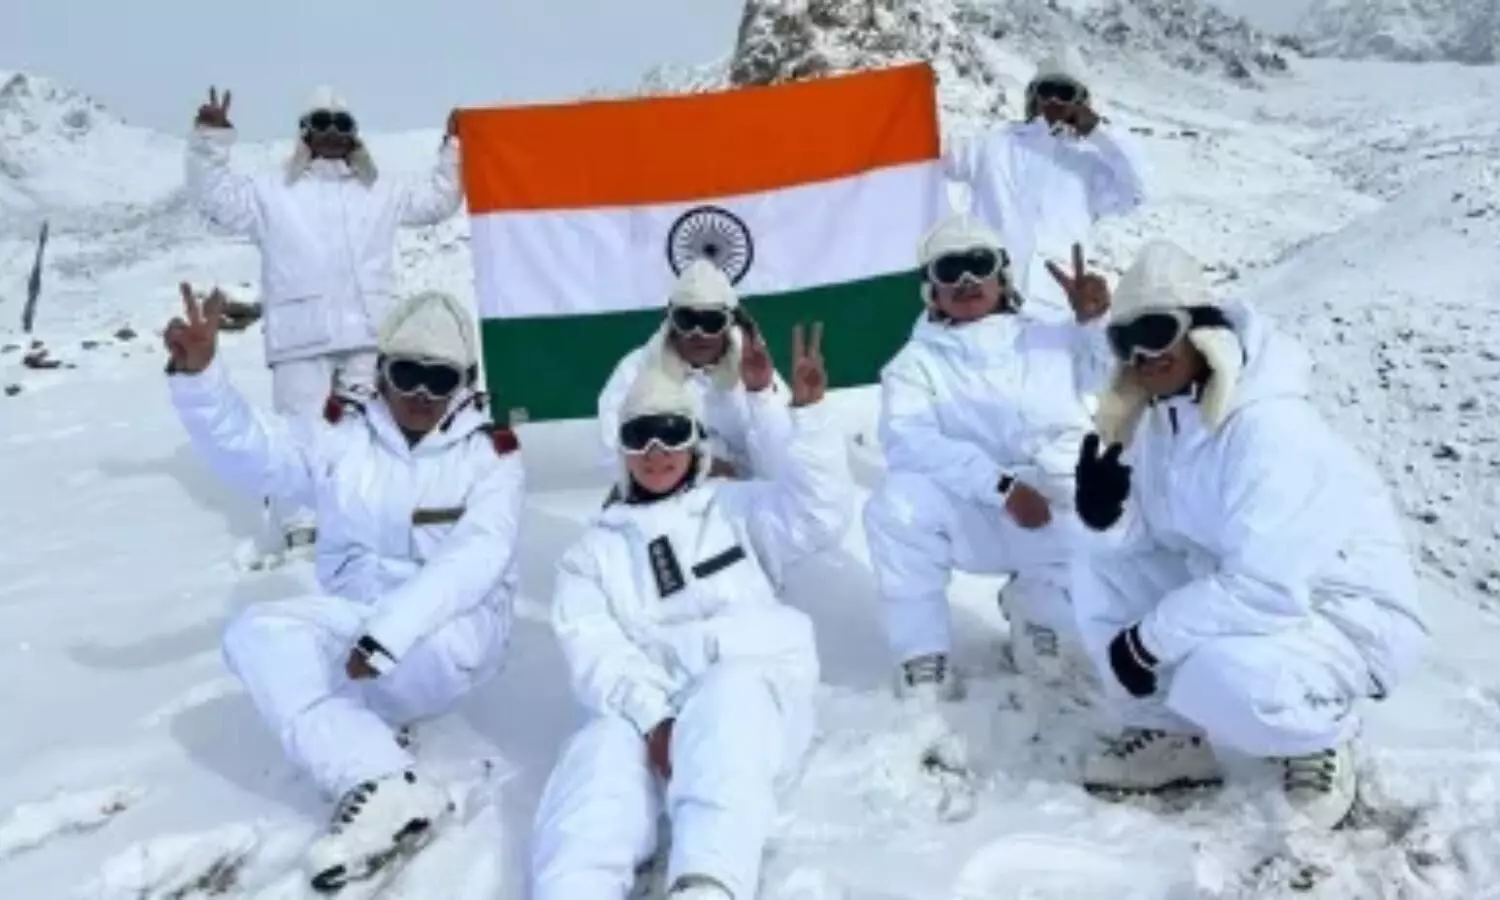 In a first, woman army doctor Captain Geetika Koul deployed in Siachen